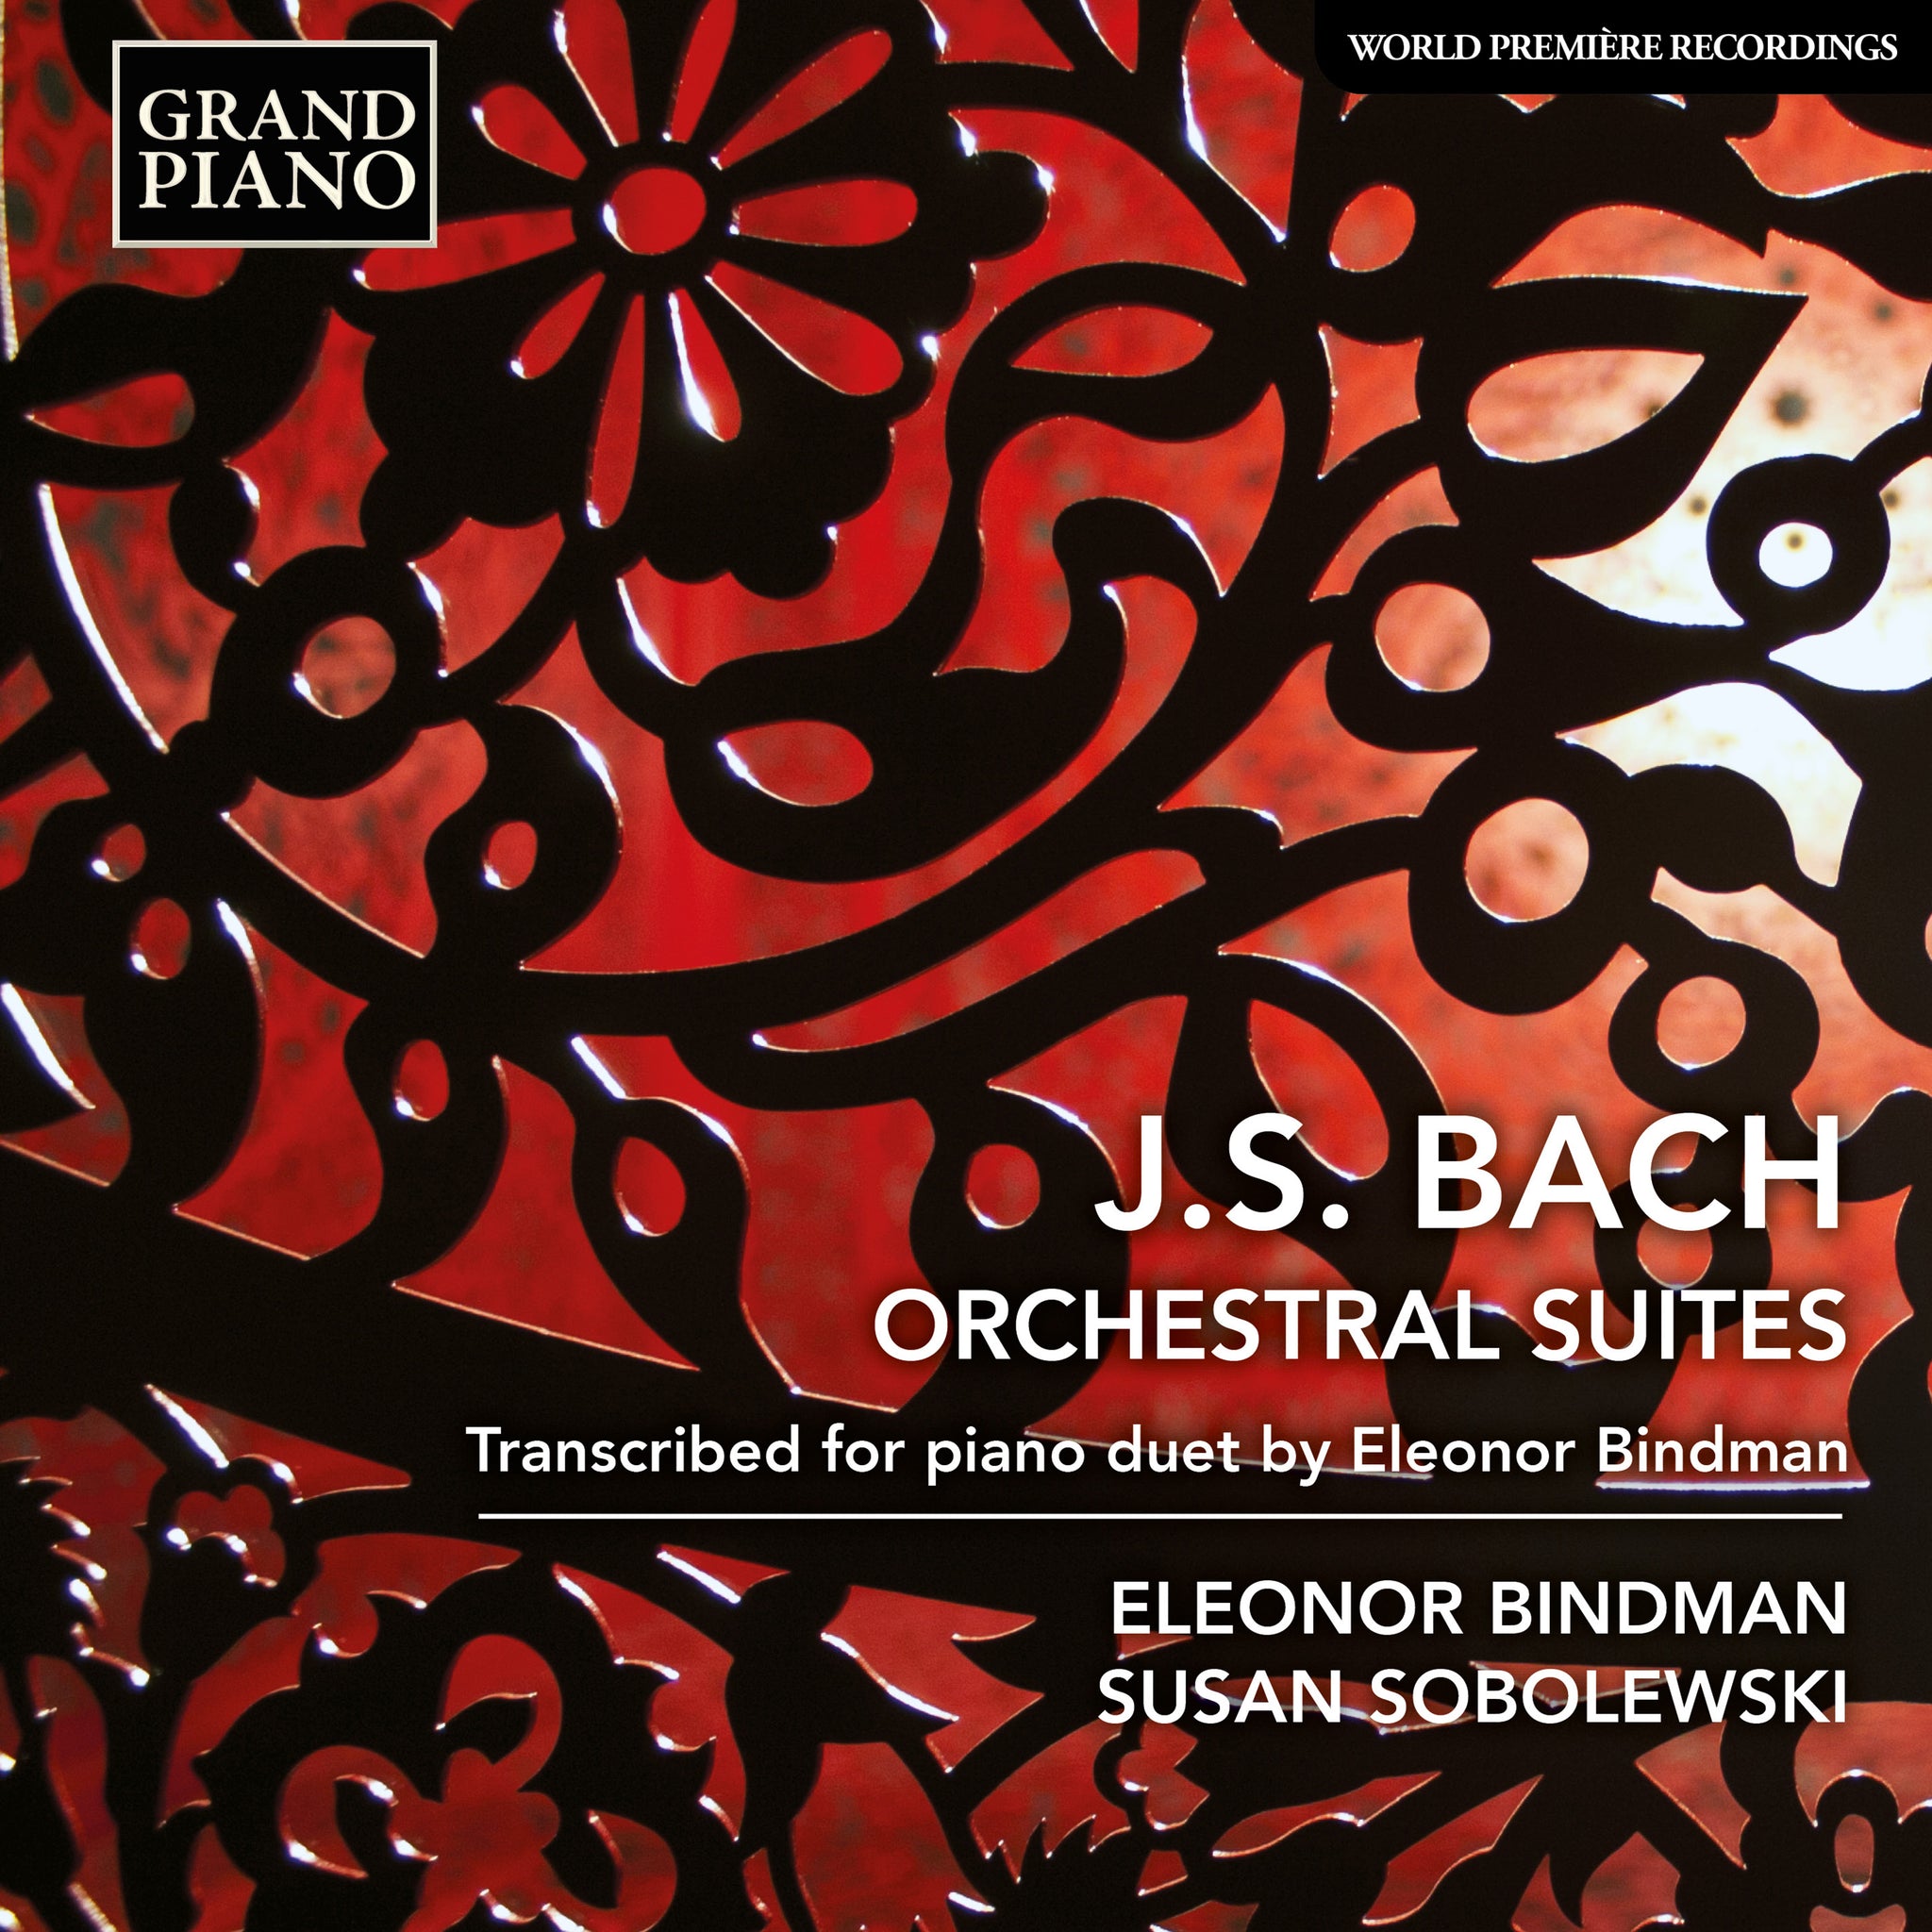 Bach: Orchestral Suites - Transcribed for Piano Duet by Eleonor Bindman